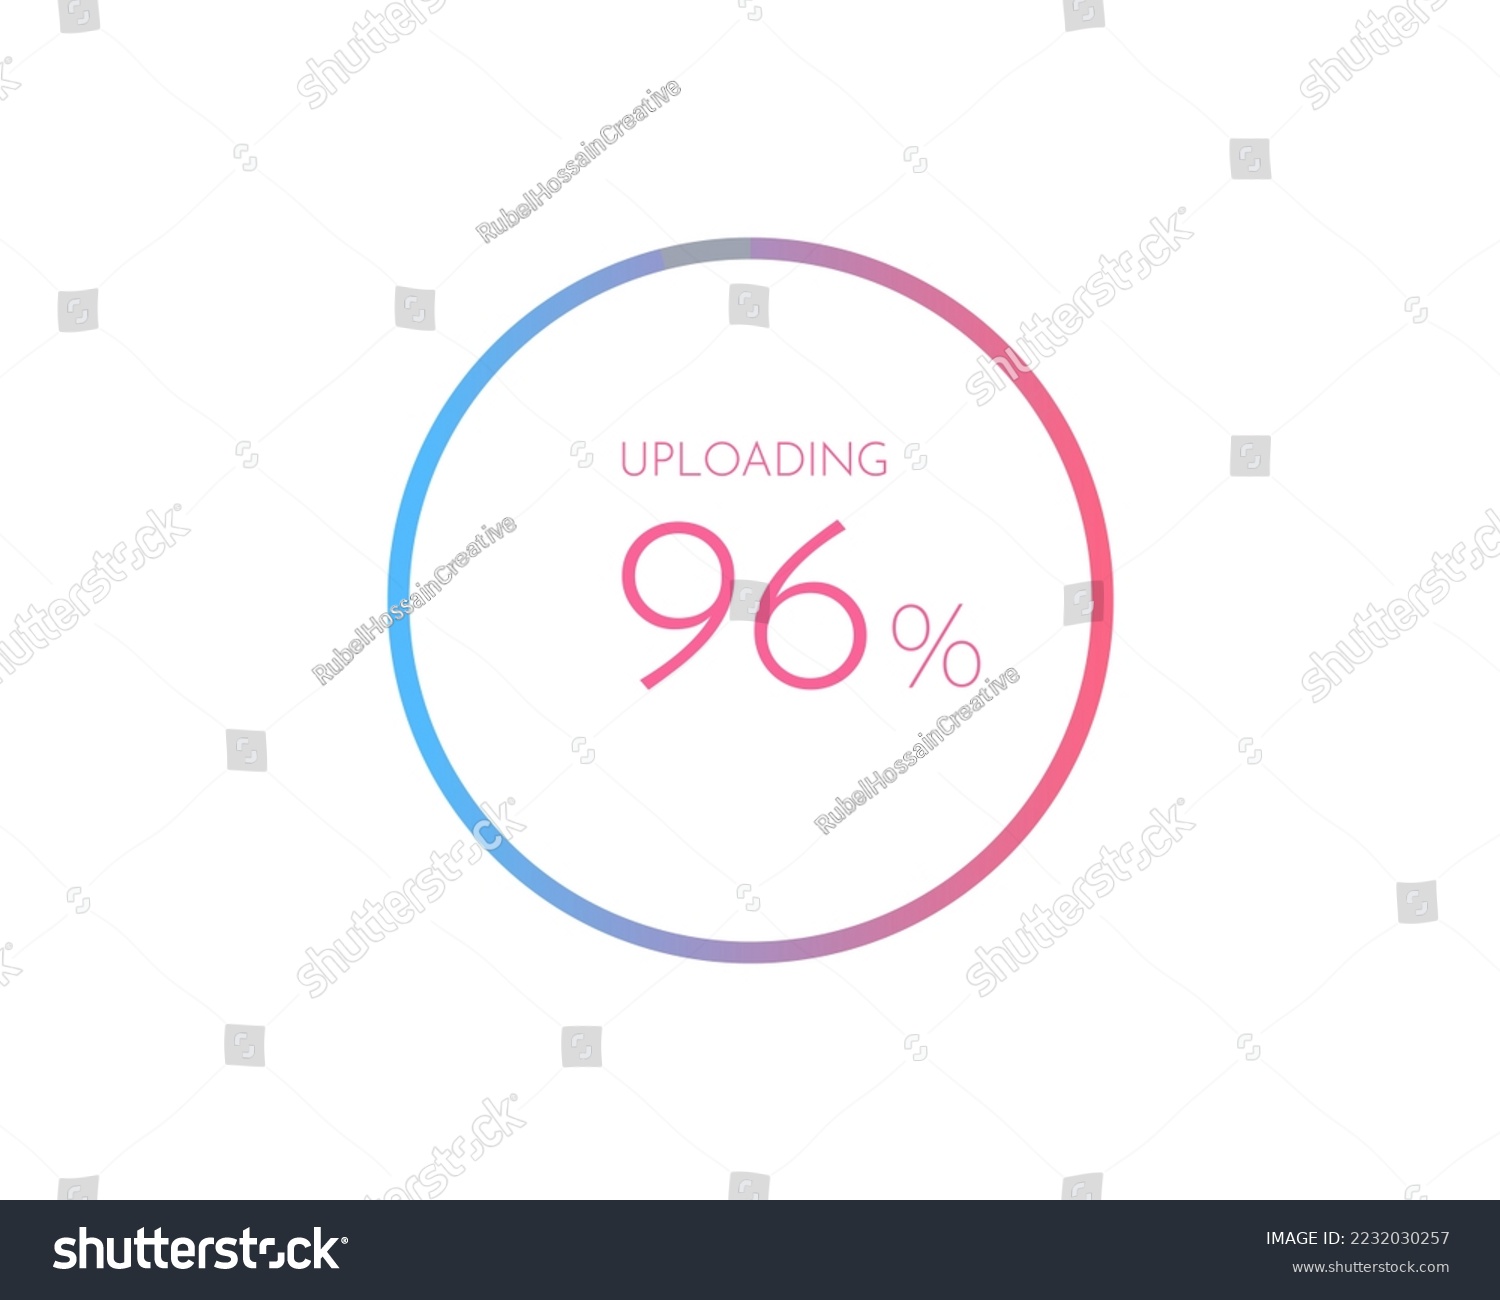 SVG of 96 percentage uploading, pie chart for Your documents, reports, 96% circle percentage diagrams for infographics svg